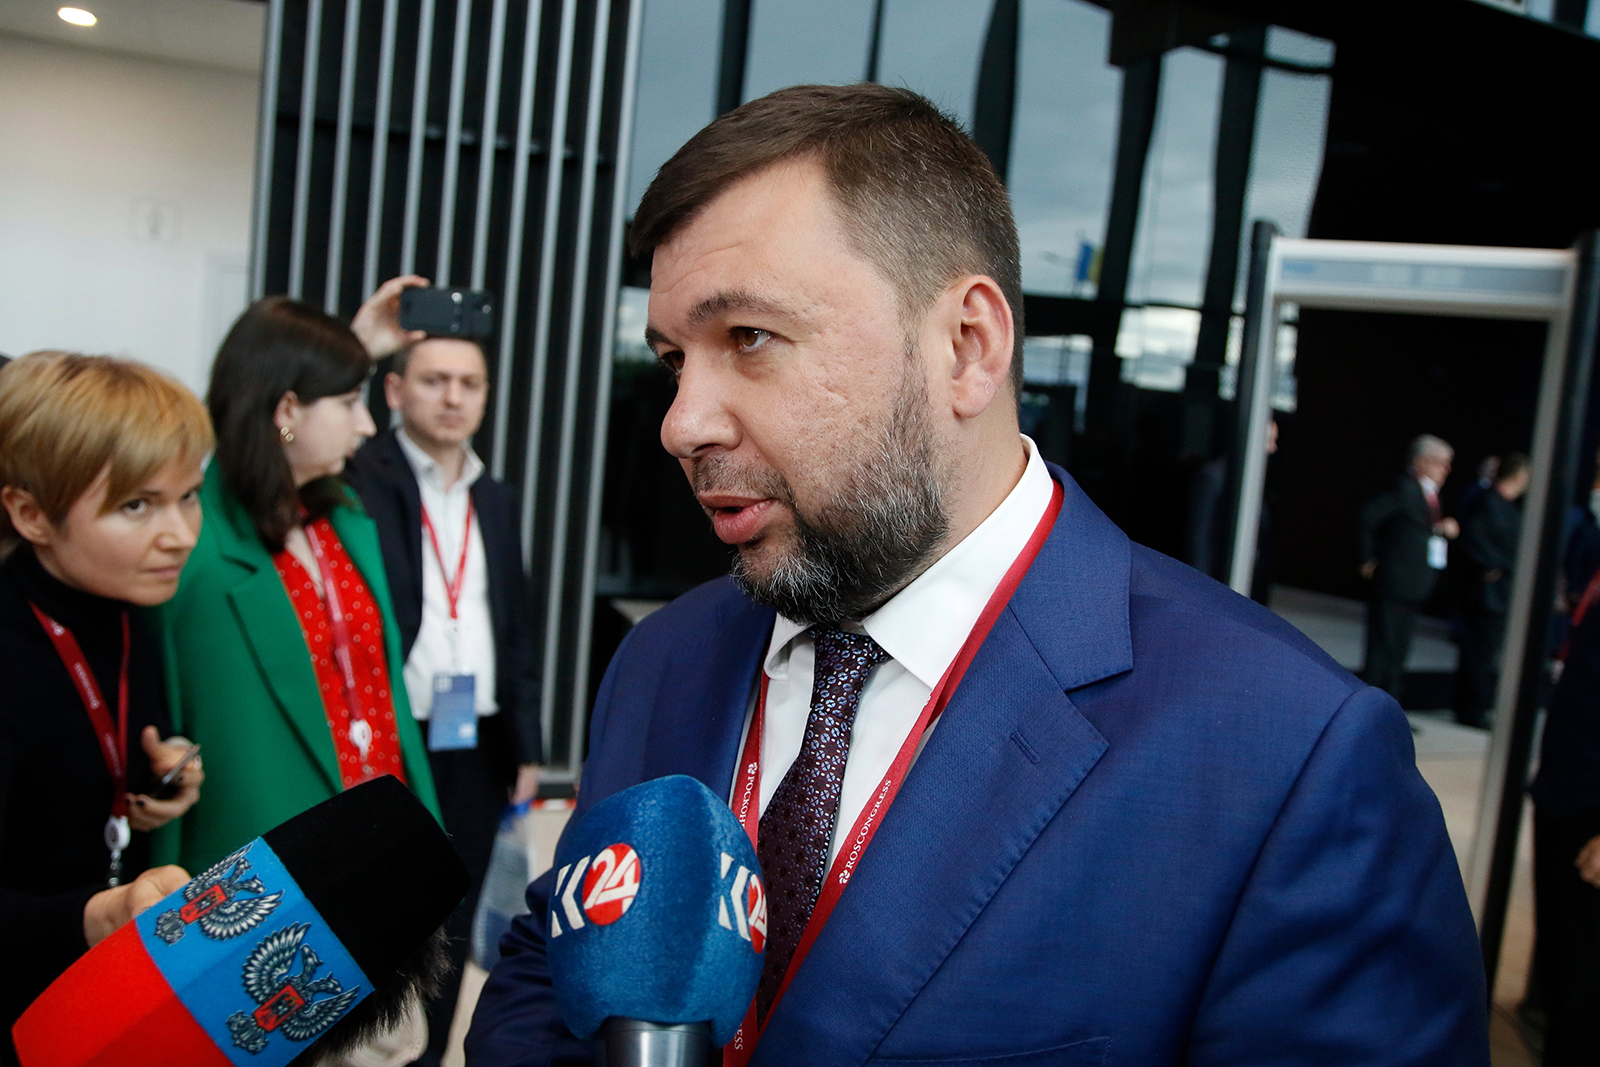 Denis Pushilin, Head of the Donetsk People's Republic speaks to the media in Olenivka on August 10.(Photo by Maksim Konstantinov/SOPA Images/LightRocket via Getty Images)